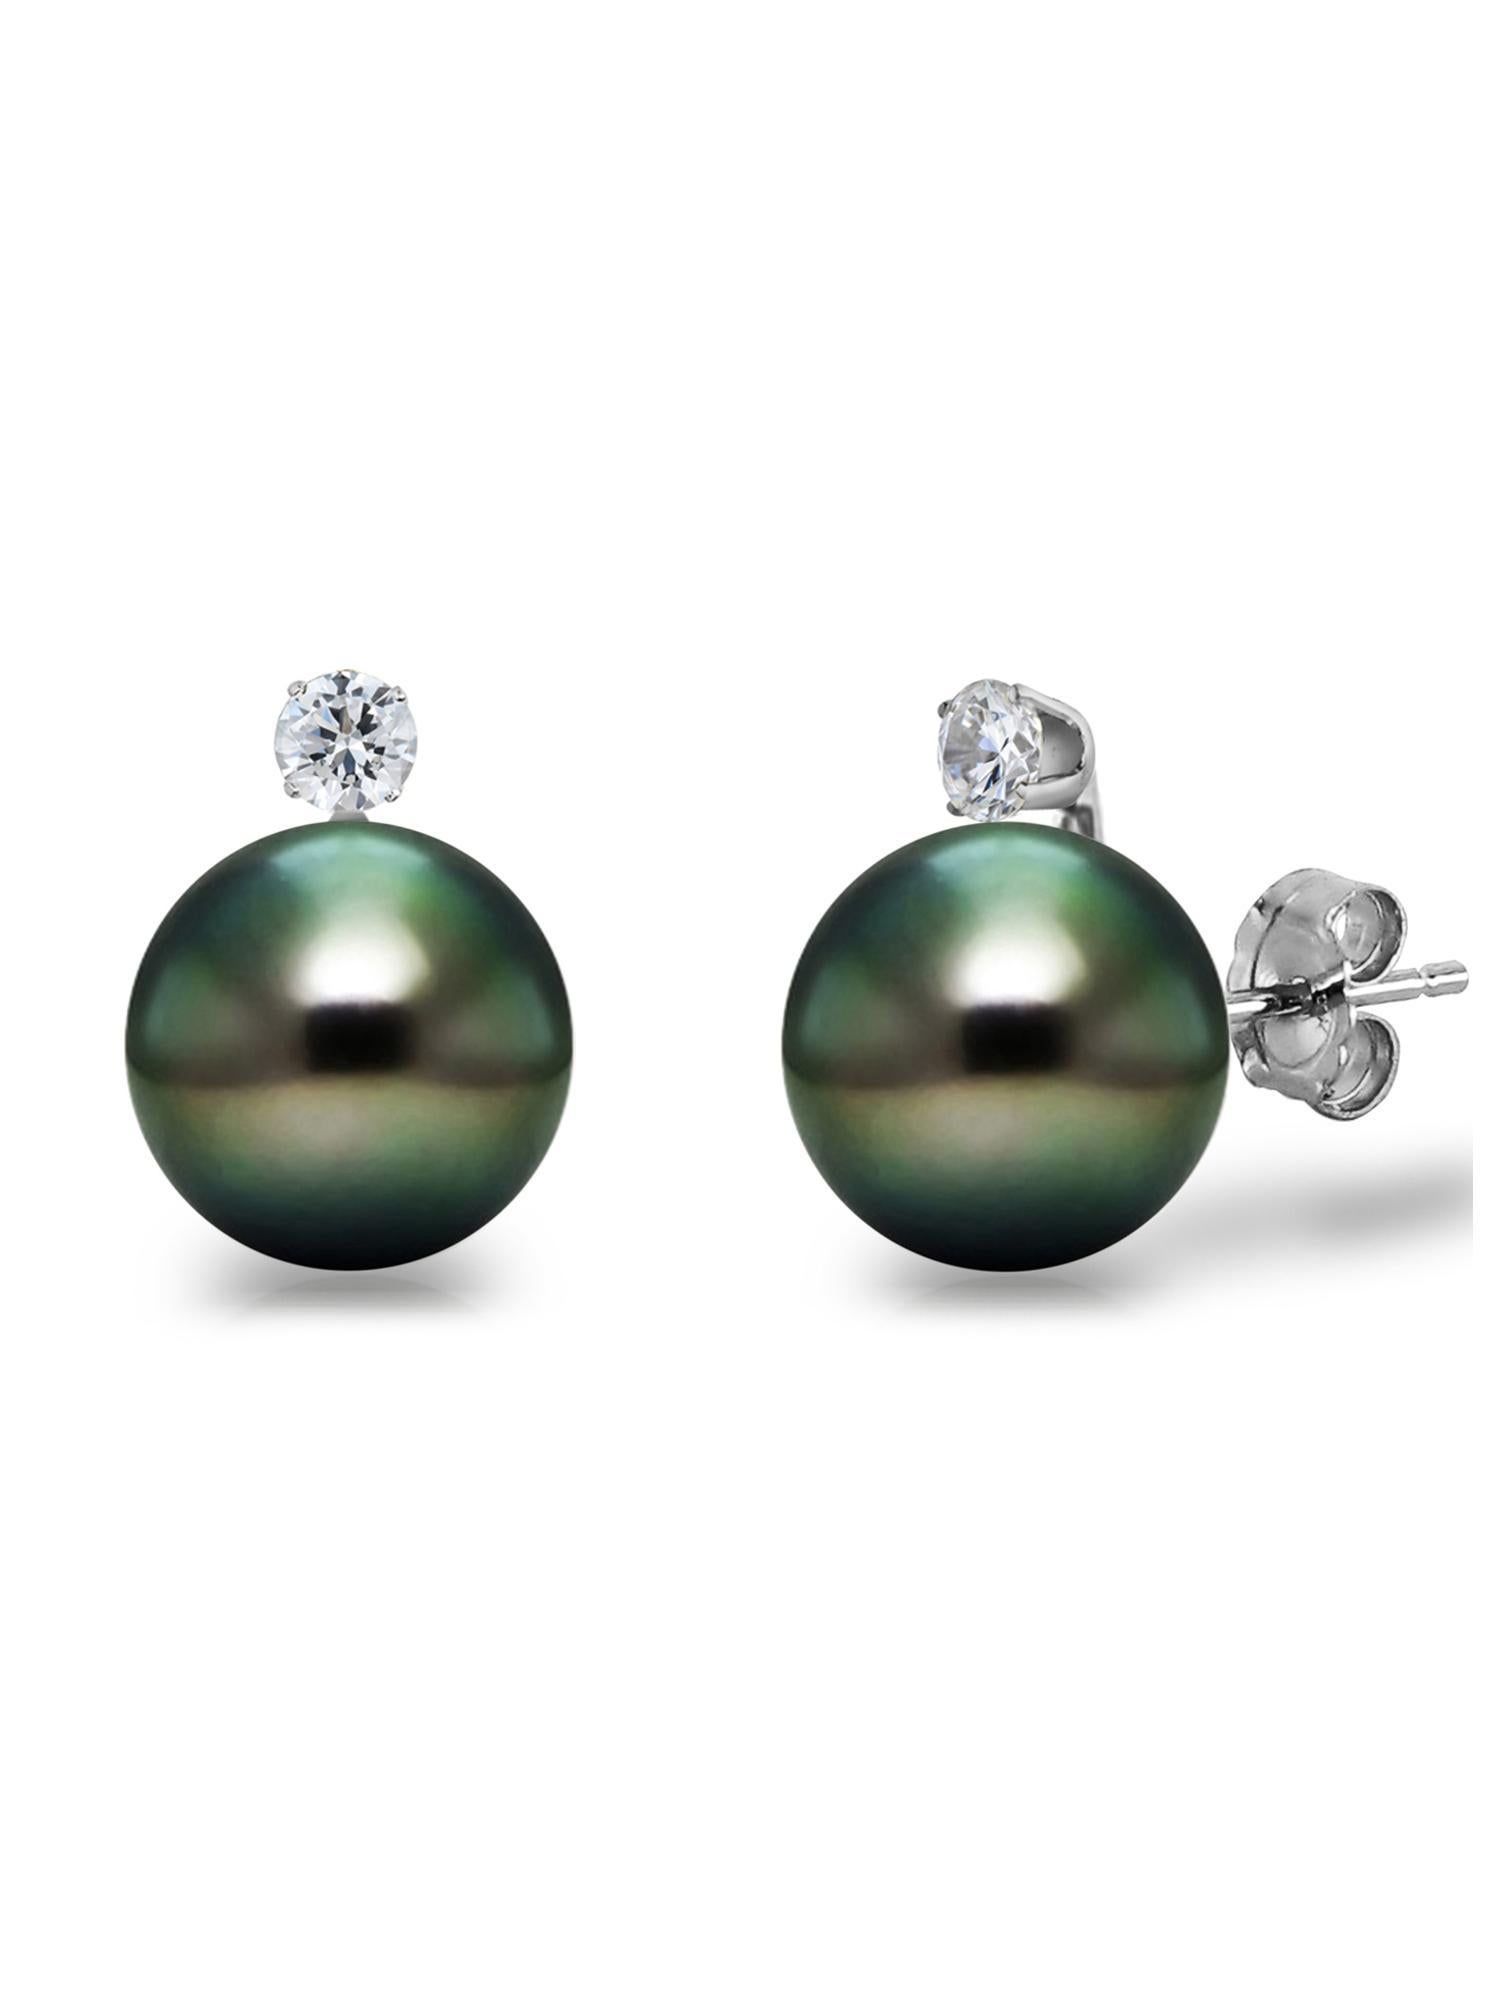 Elegance and simplicity meet in this gorgeous earrings with sparkling diamonds These diamond pearl earrings are a gift everyone will enjoy. A feminine piece of jewelry which can be worn to work, a day at the mall or a wedding party. Always a